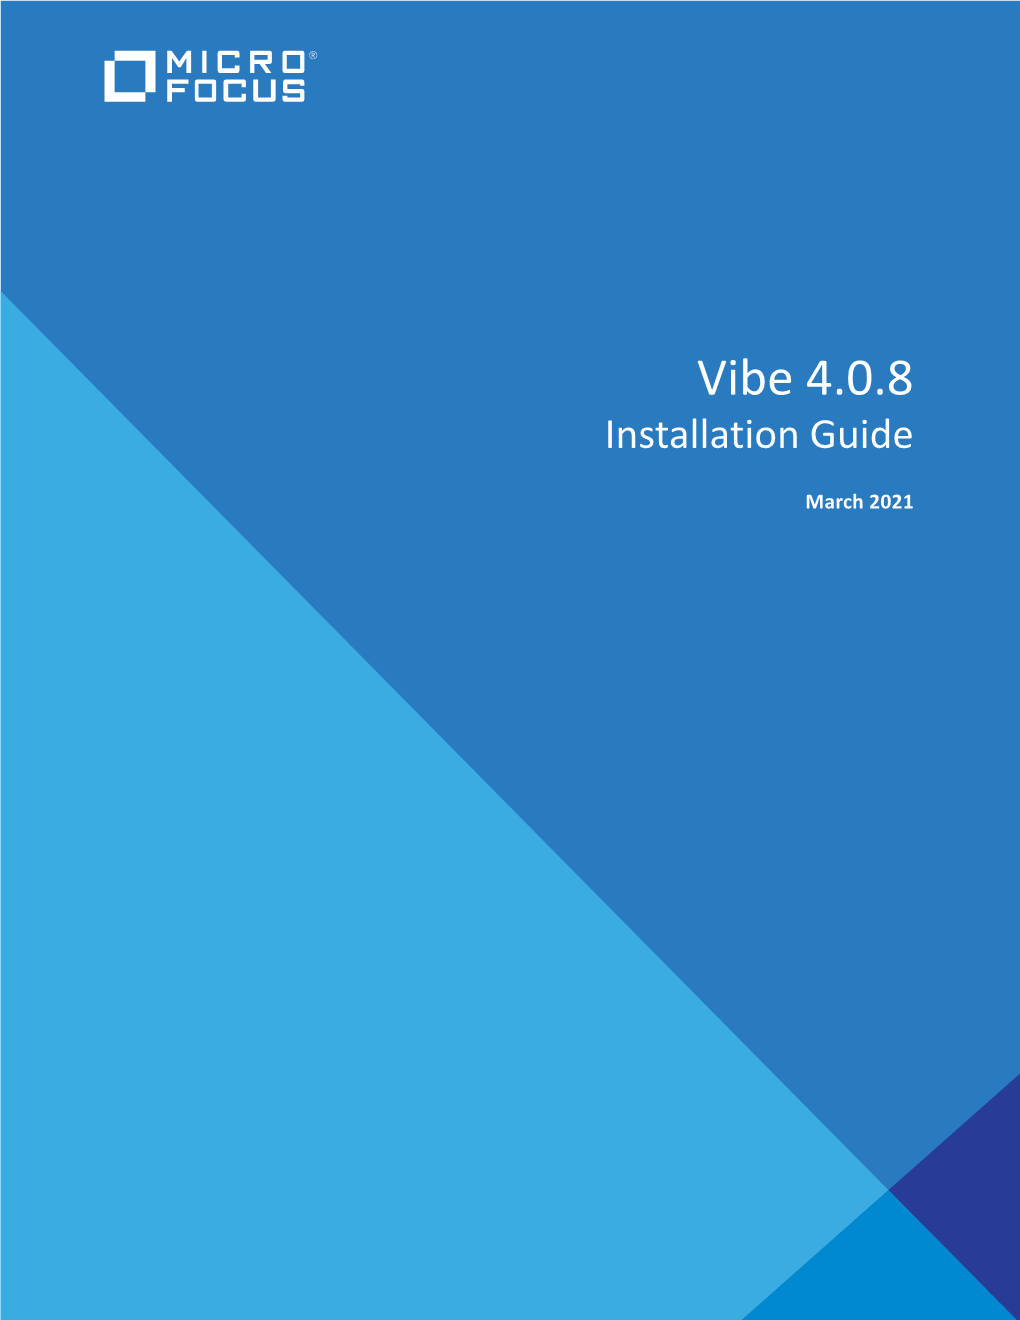 Vibe 4.0.8 Installation Guide